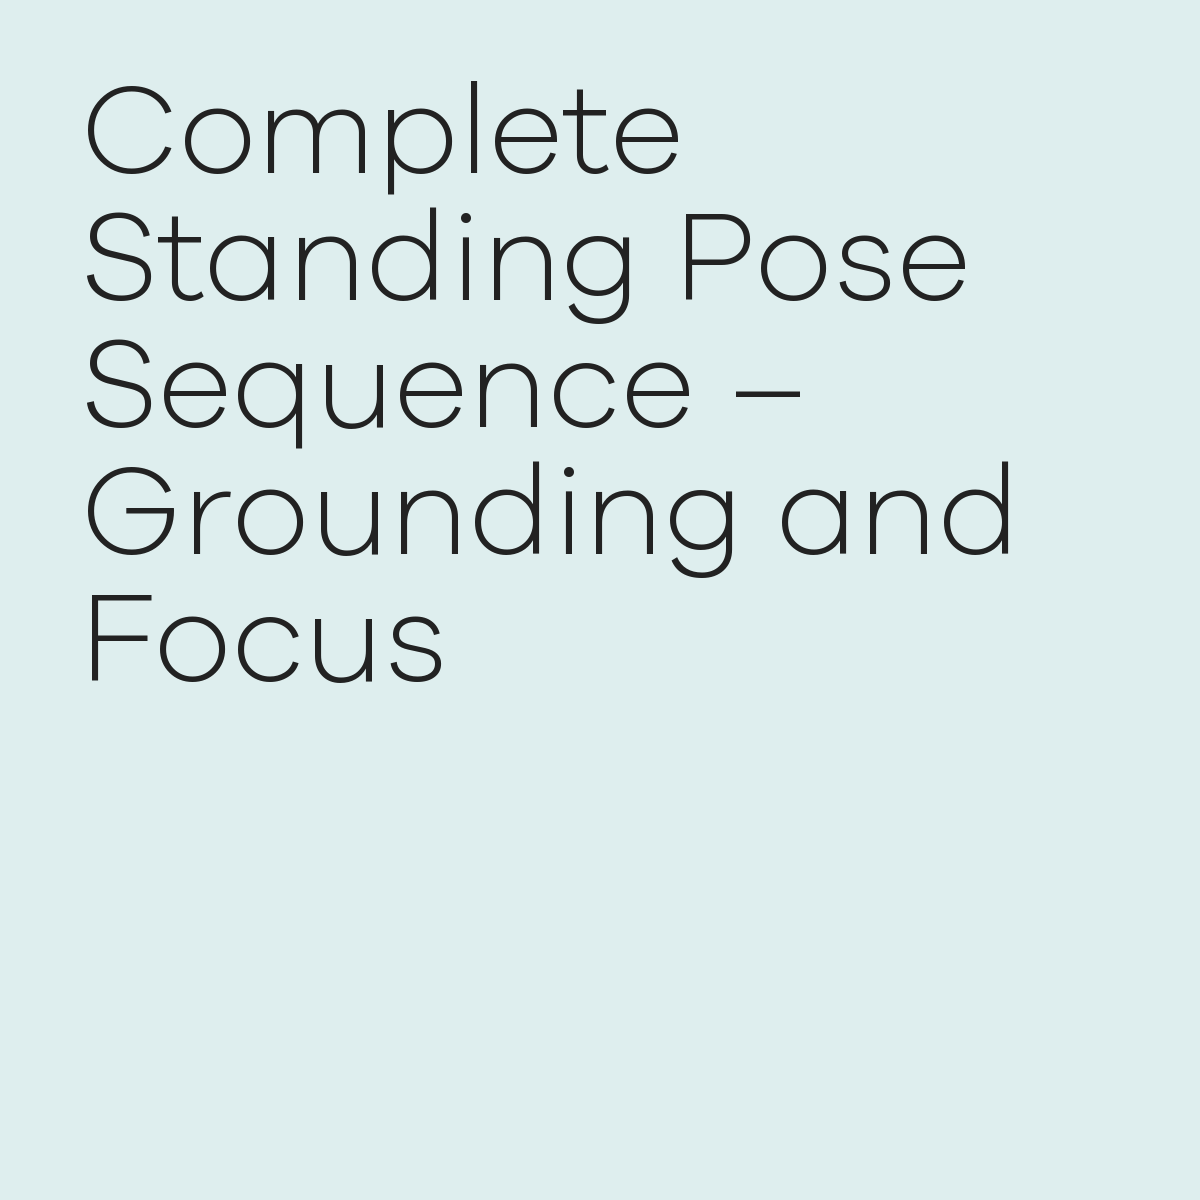 Complete standing pose sequence for grounding and focus